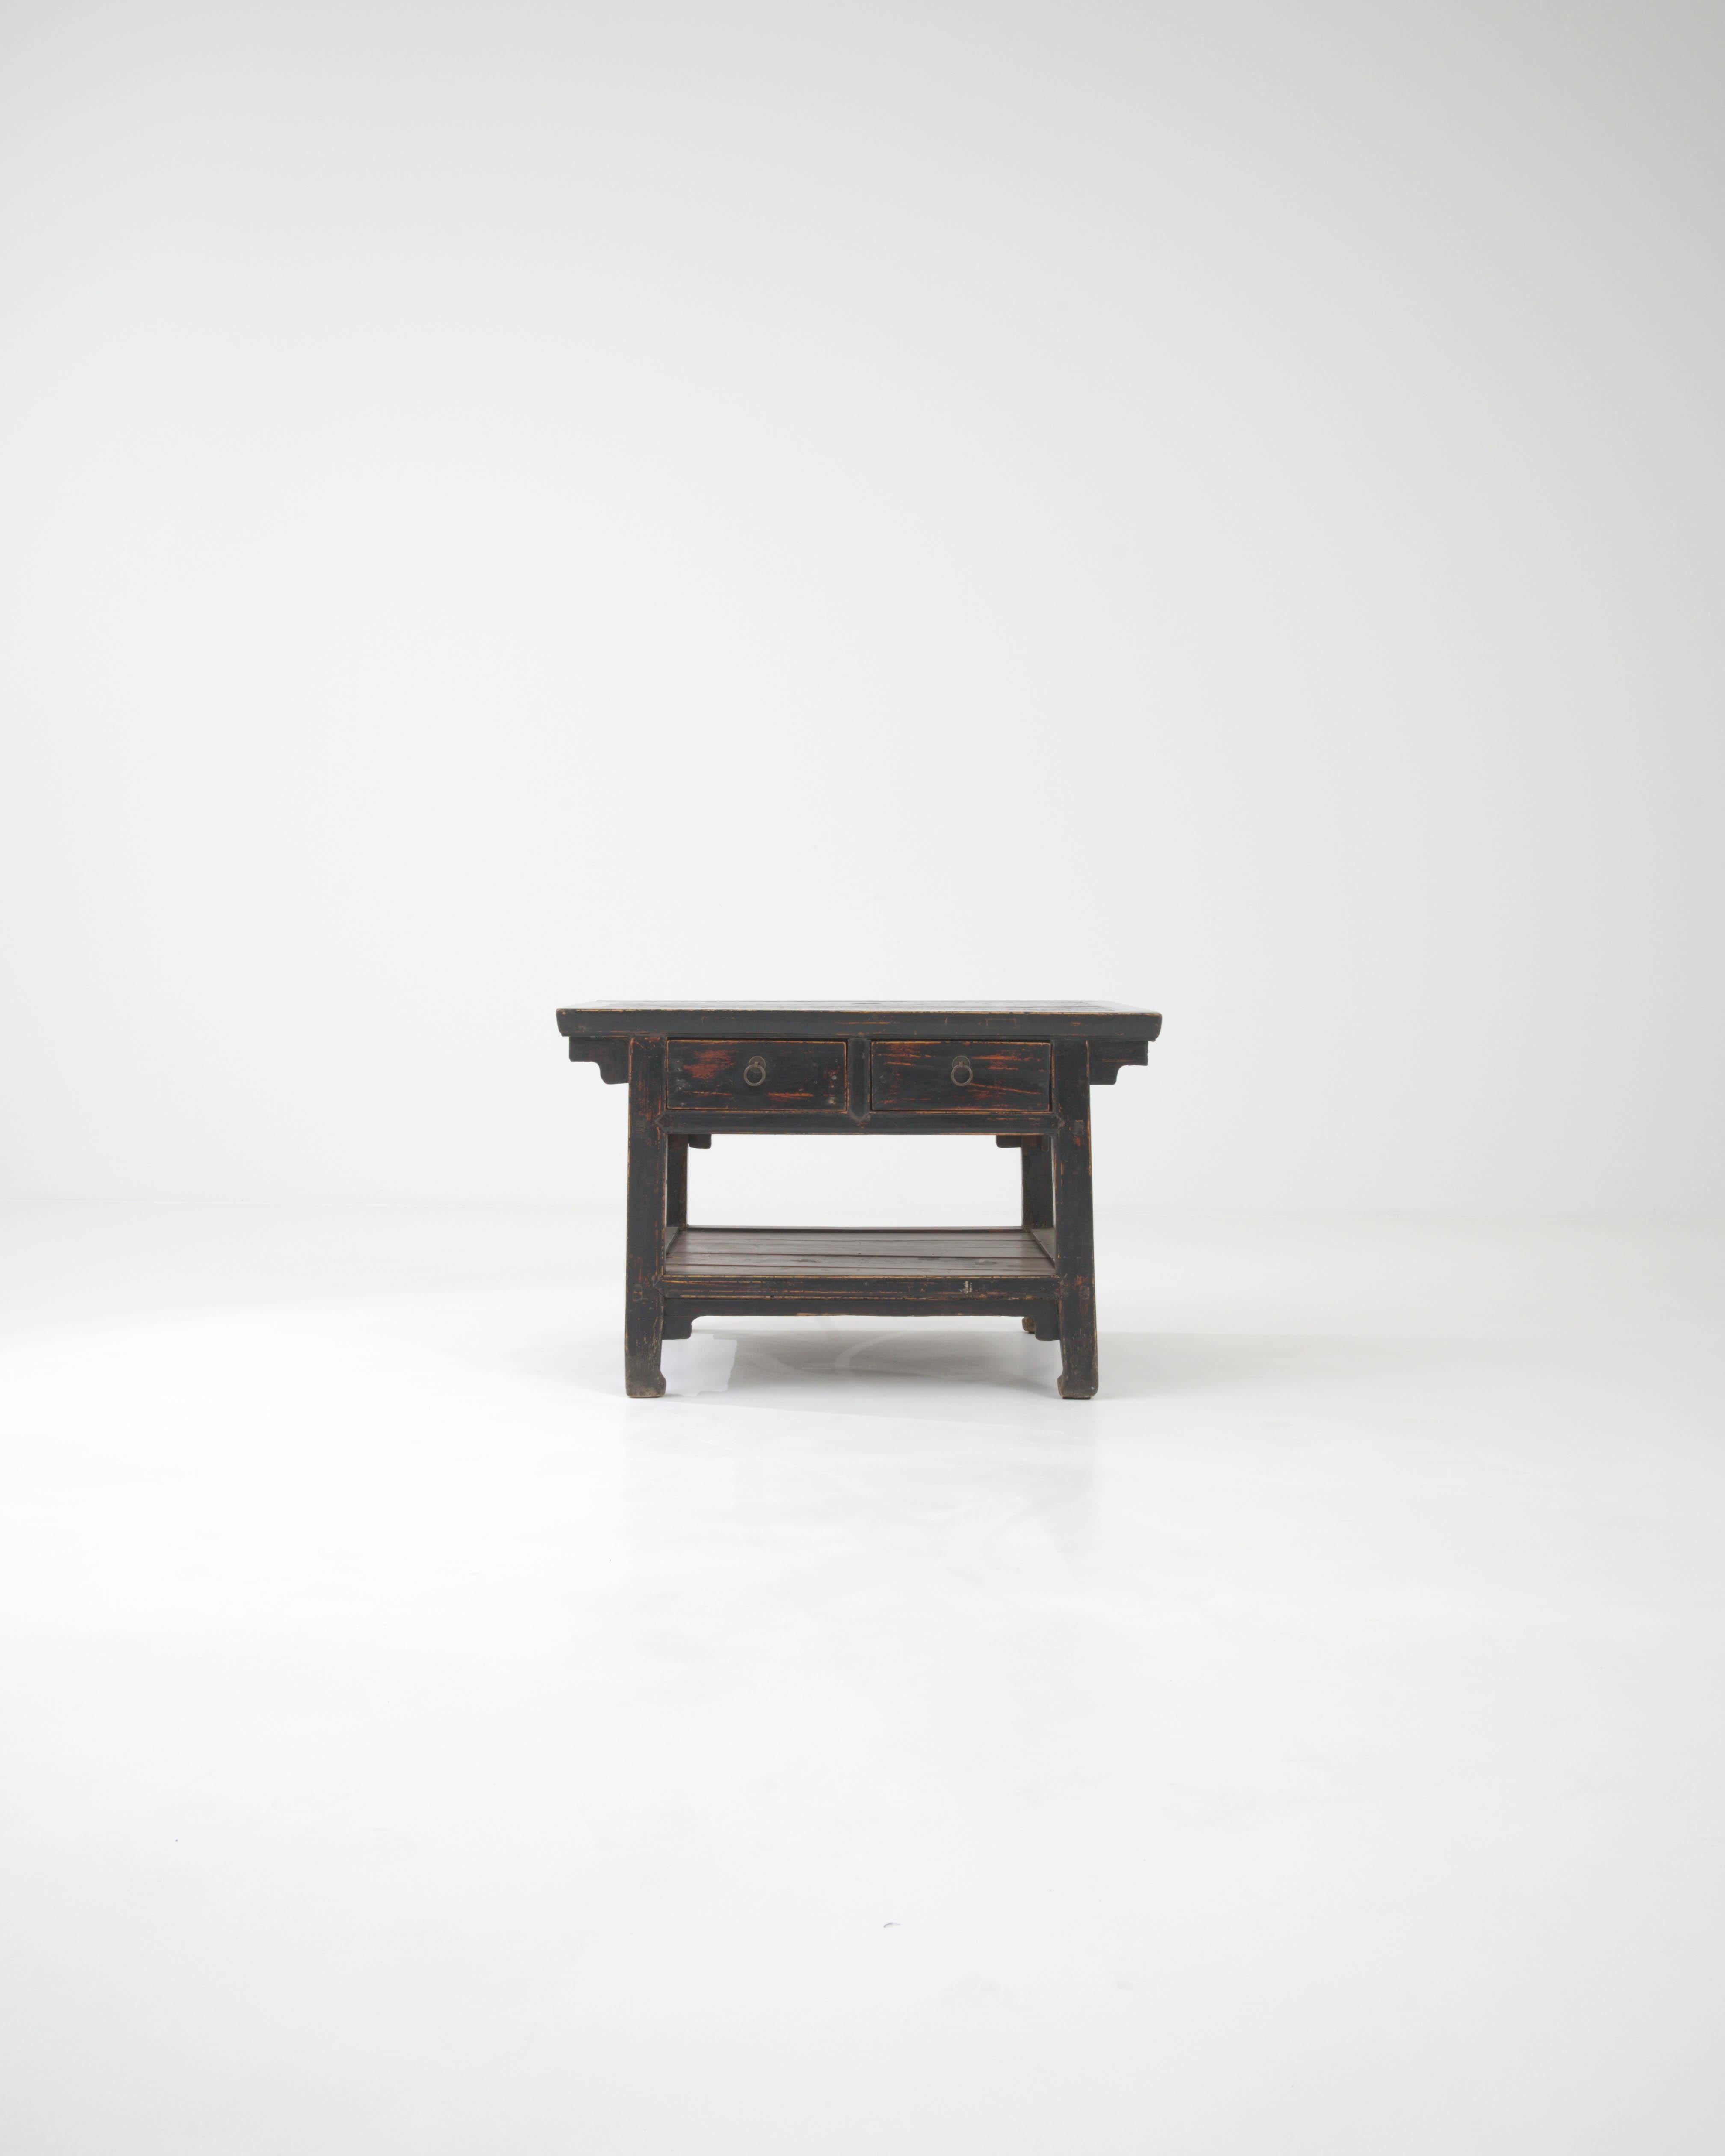 This 19th-century Chinese coffee table is a wonderful piece that harmoniously blends functionality with ancient tradition. Crafted from solid wood, its design reflects the practicality and aesthetic sensibilities of the period, with sturdy legs